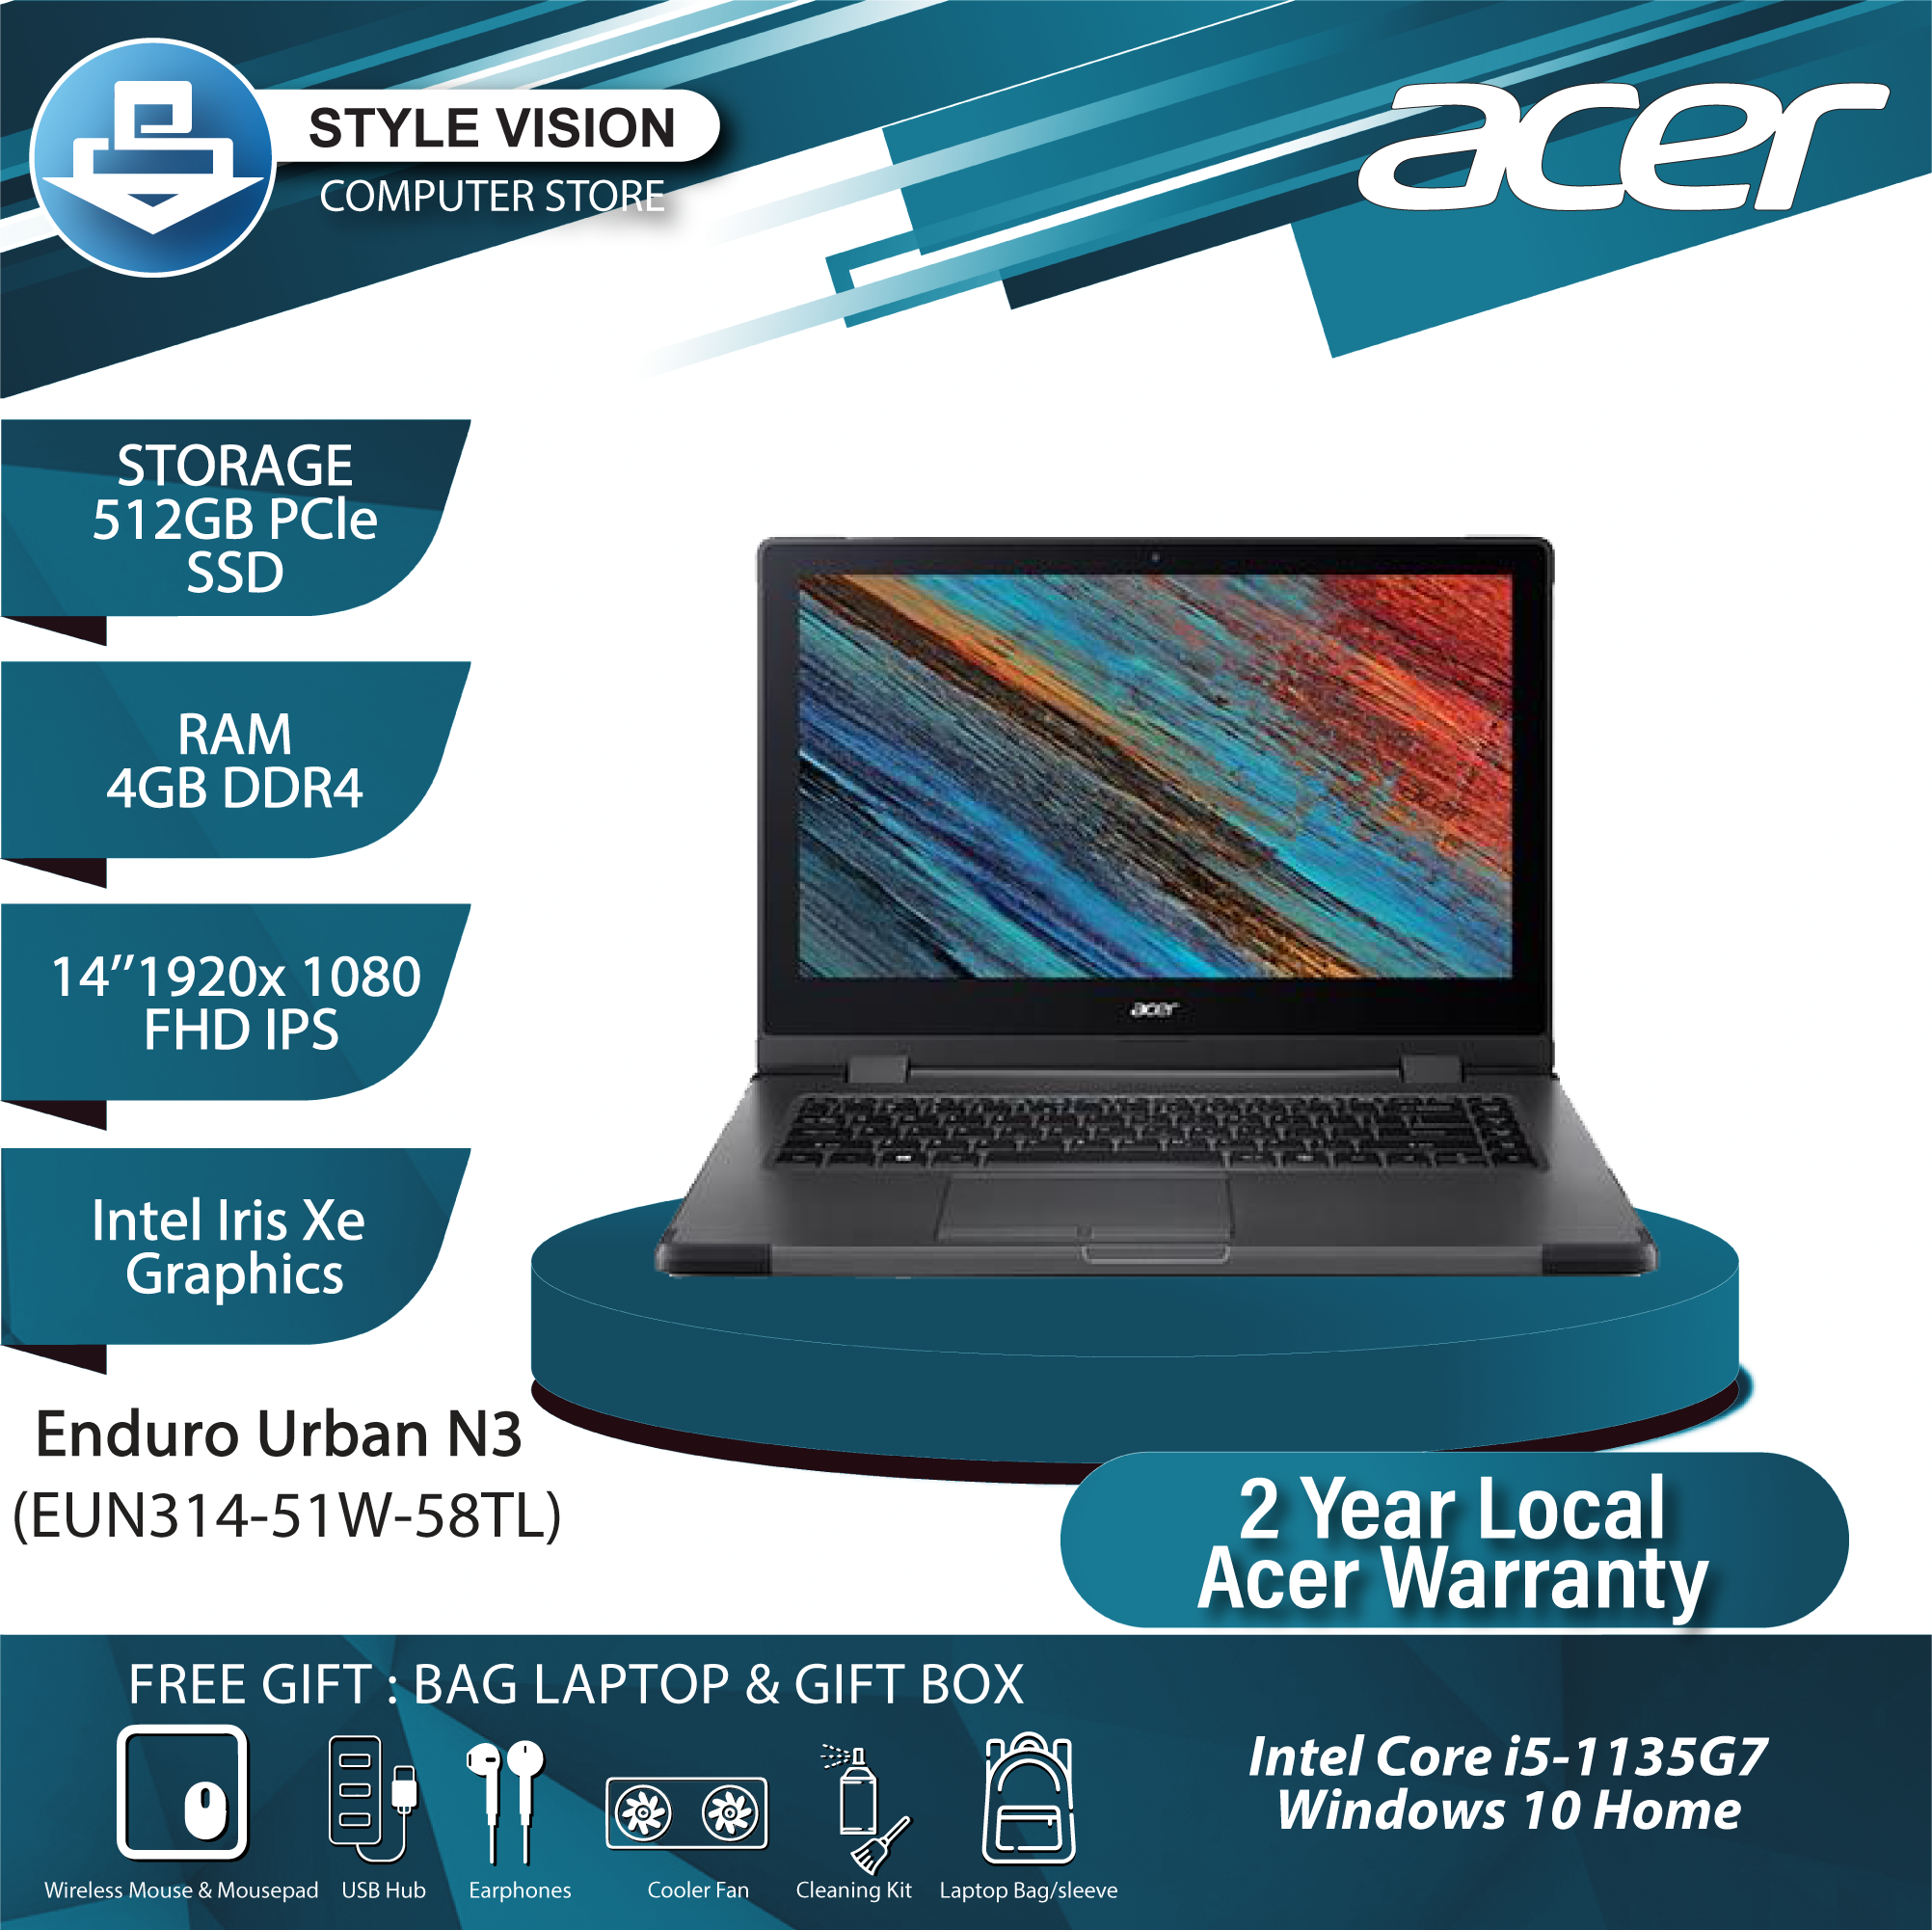 Acer Enduro Urban N3 (EUN314-51W-58TL) I5-1135G7/4GB/512GB/14"FHD/W10 –  Style Vision Computer Store